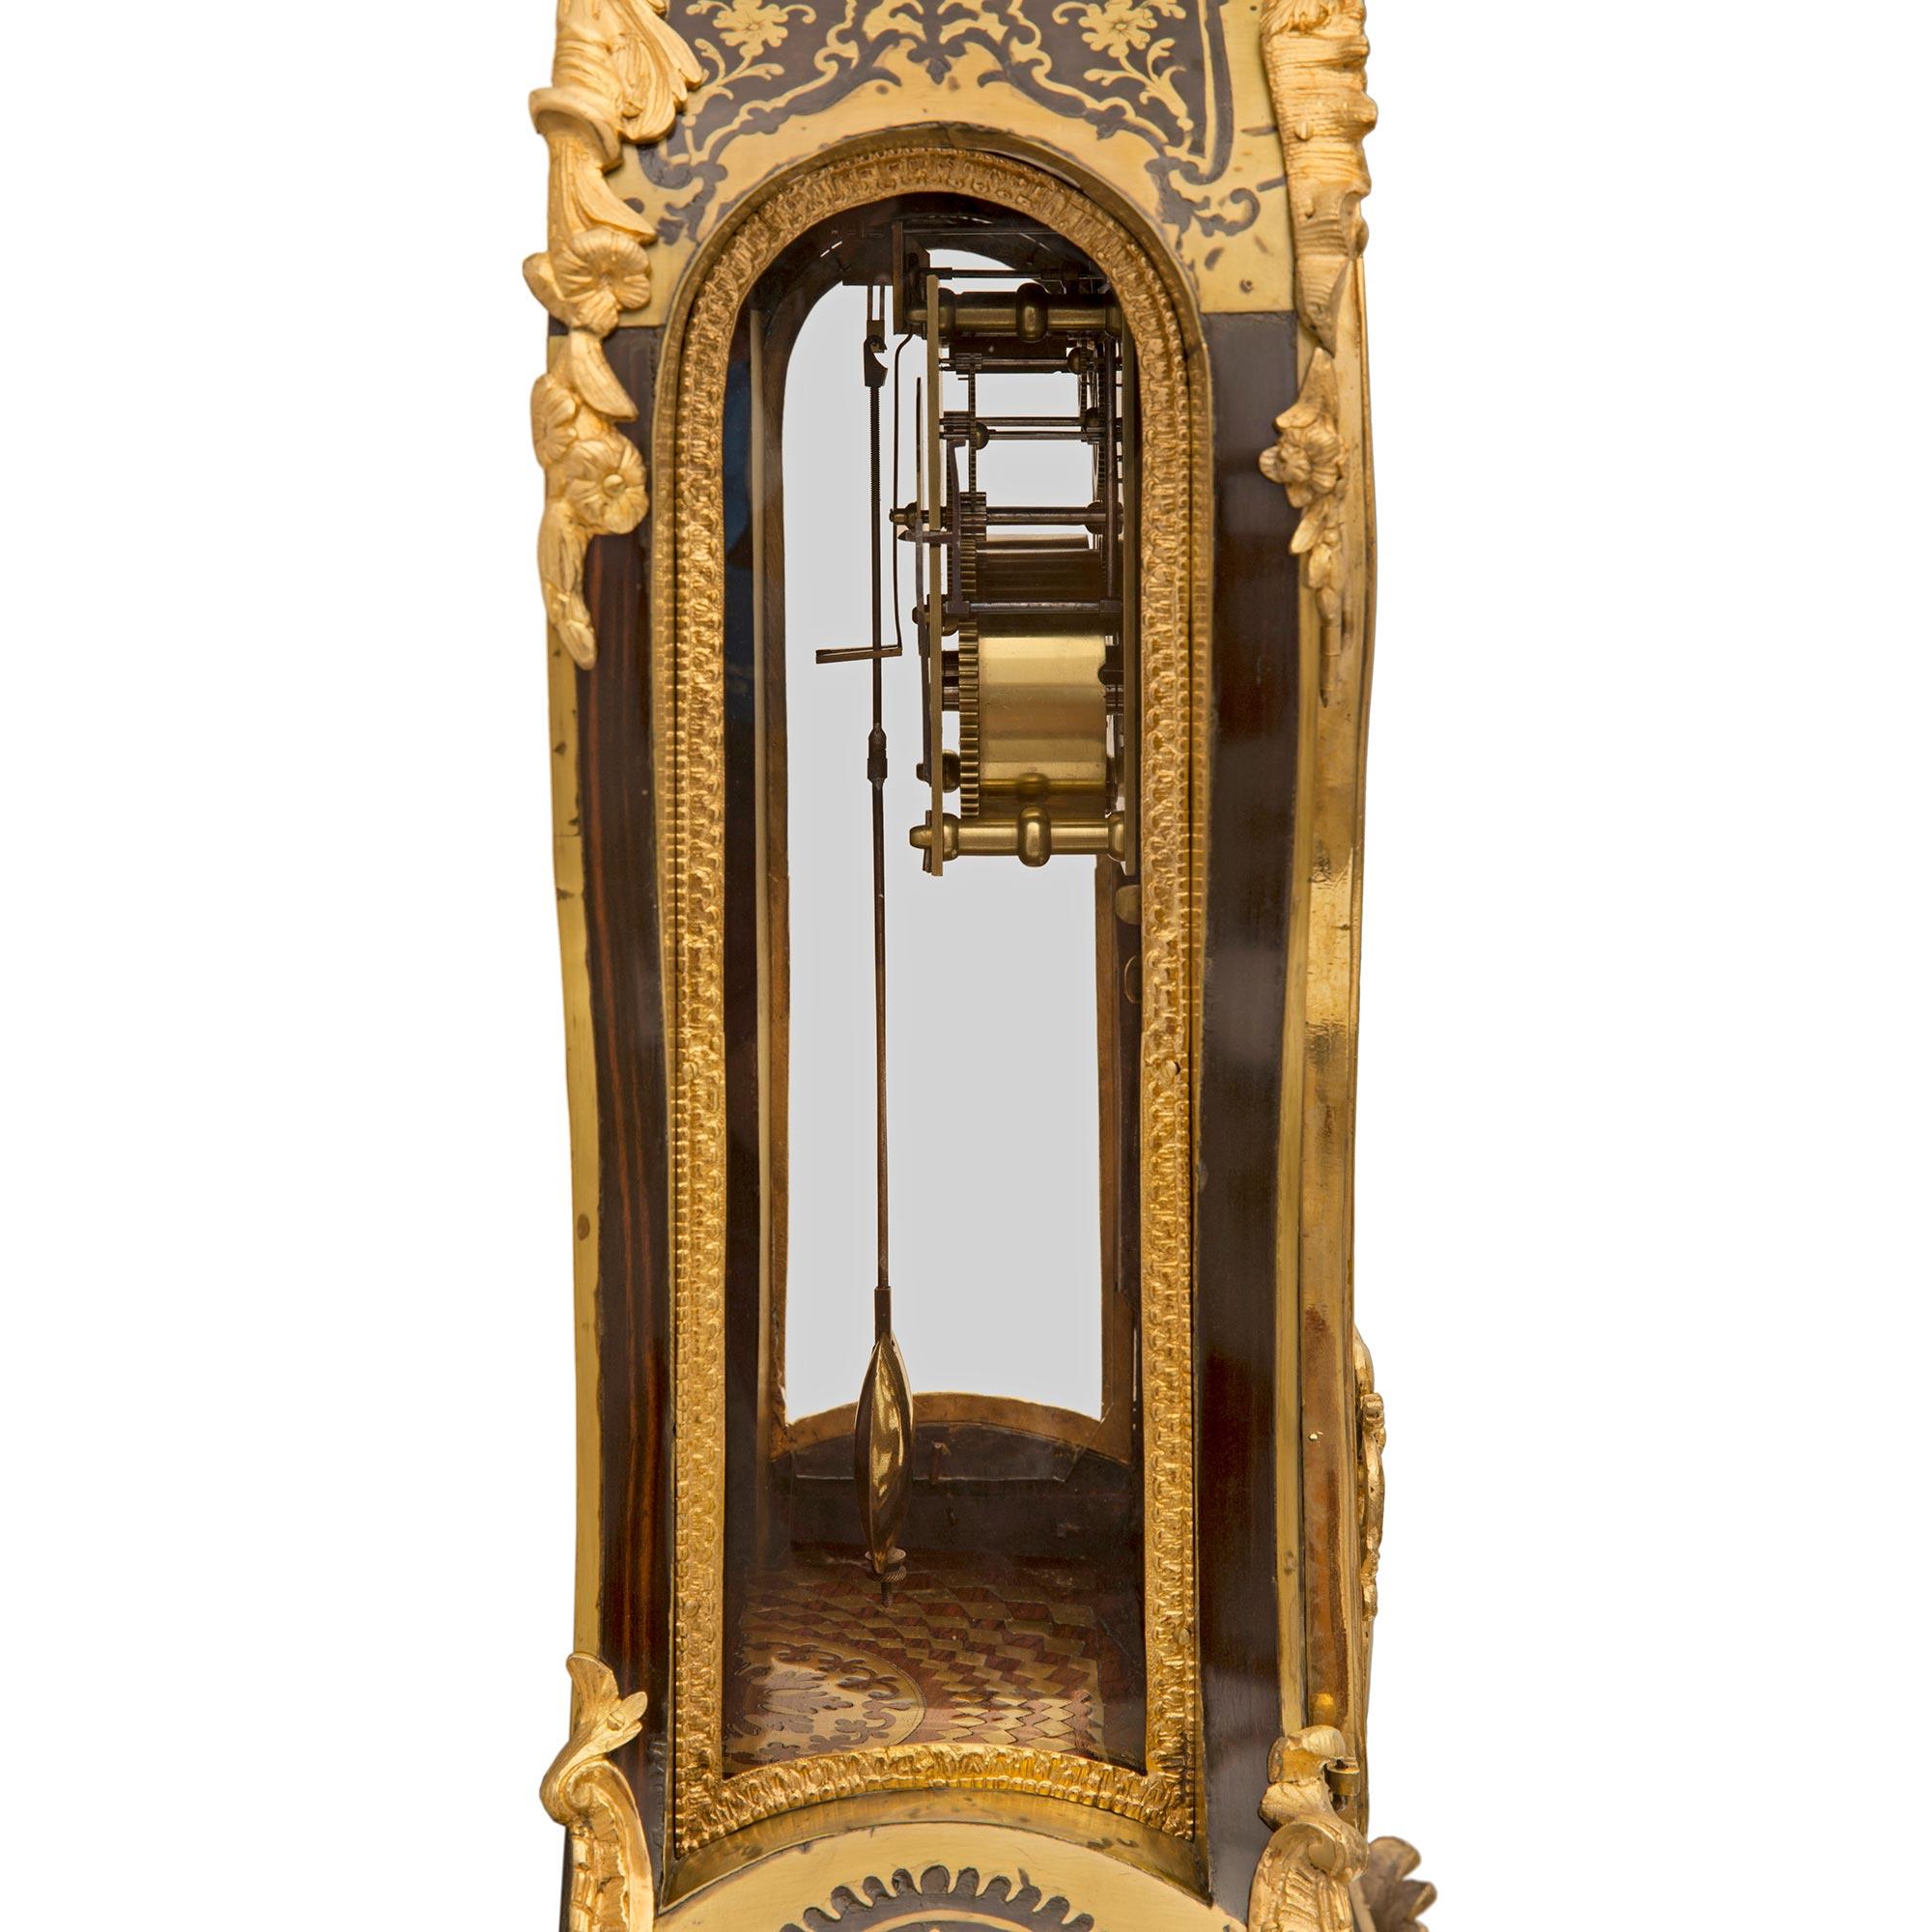 French 18th Century Louis XV Period Tortoiseshell and Ormolu Boulle Cartel Clock For Sale 1